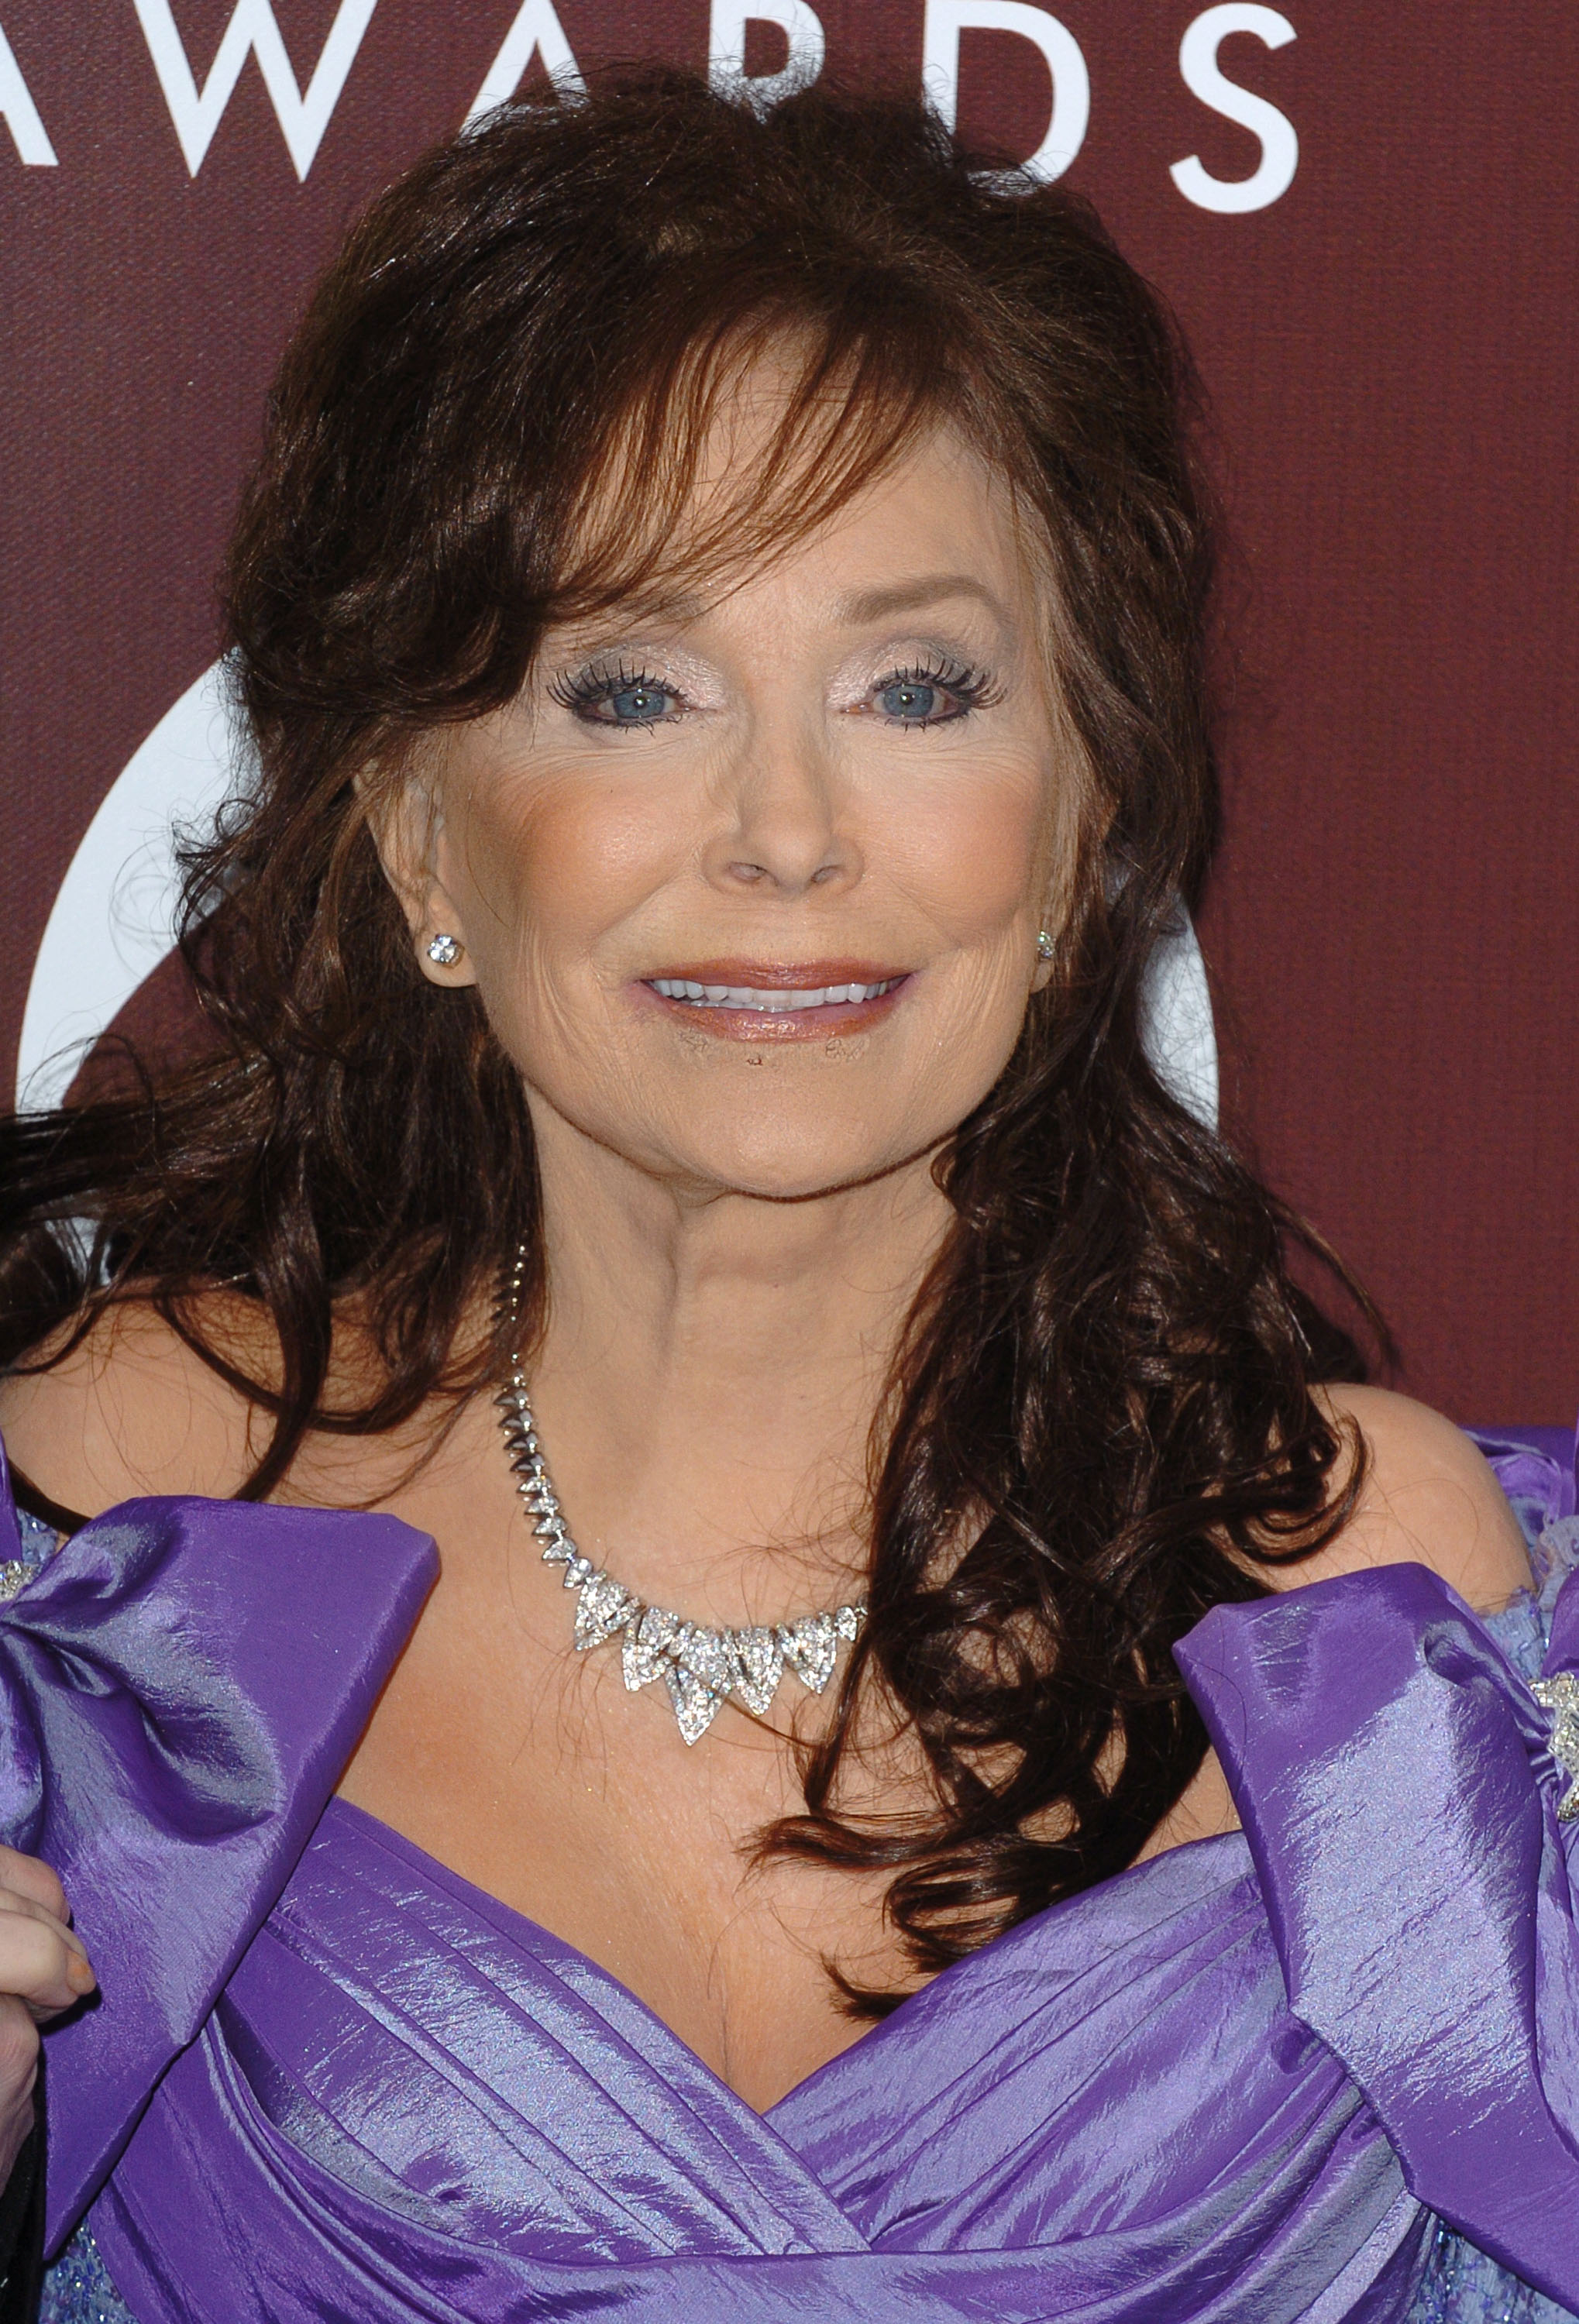 Loretta Lynn attends the 47th Annual Grammy Awards | Source: Getty Images